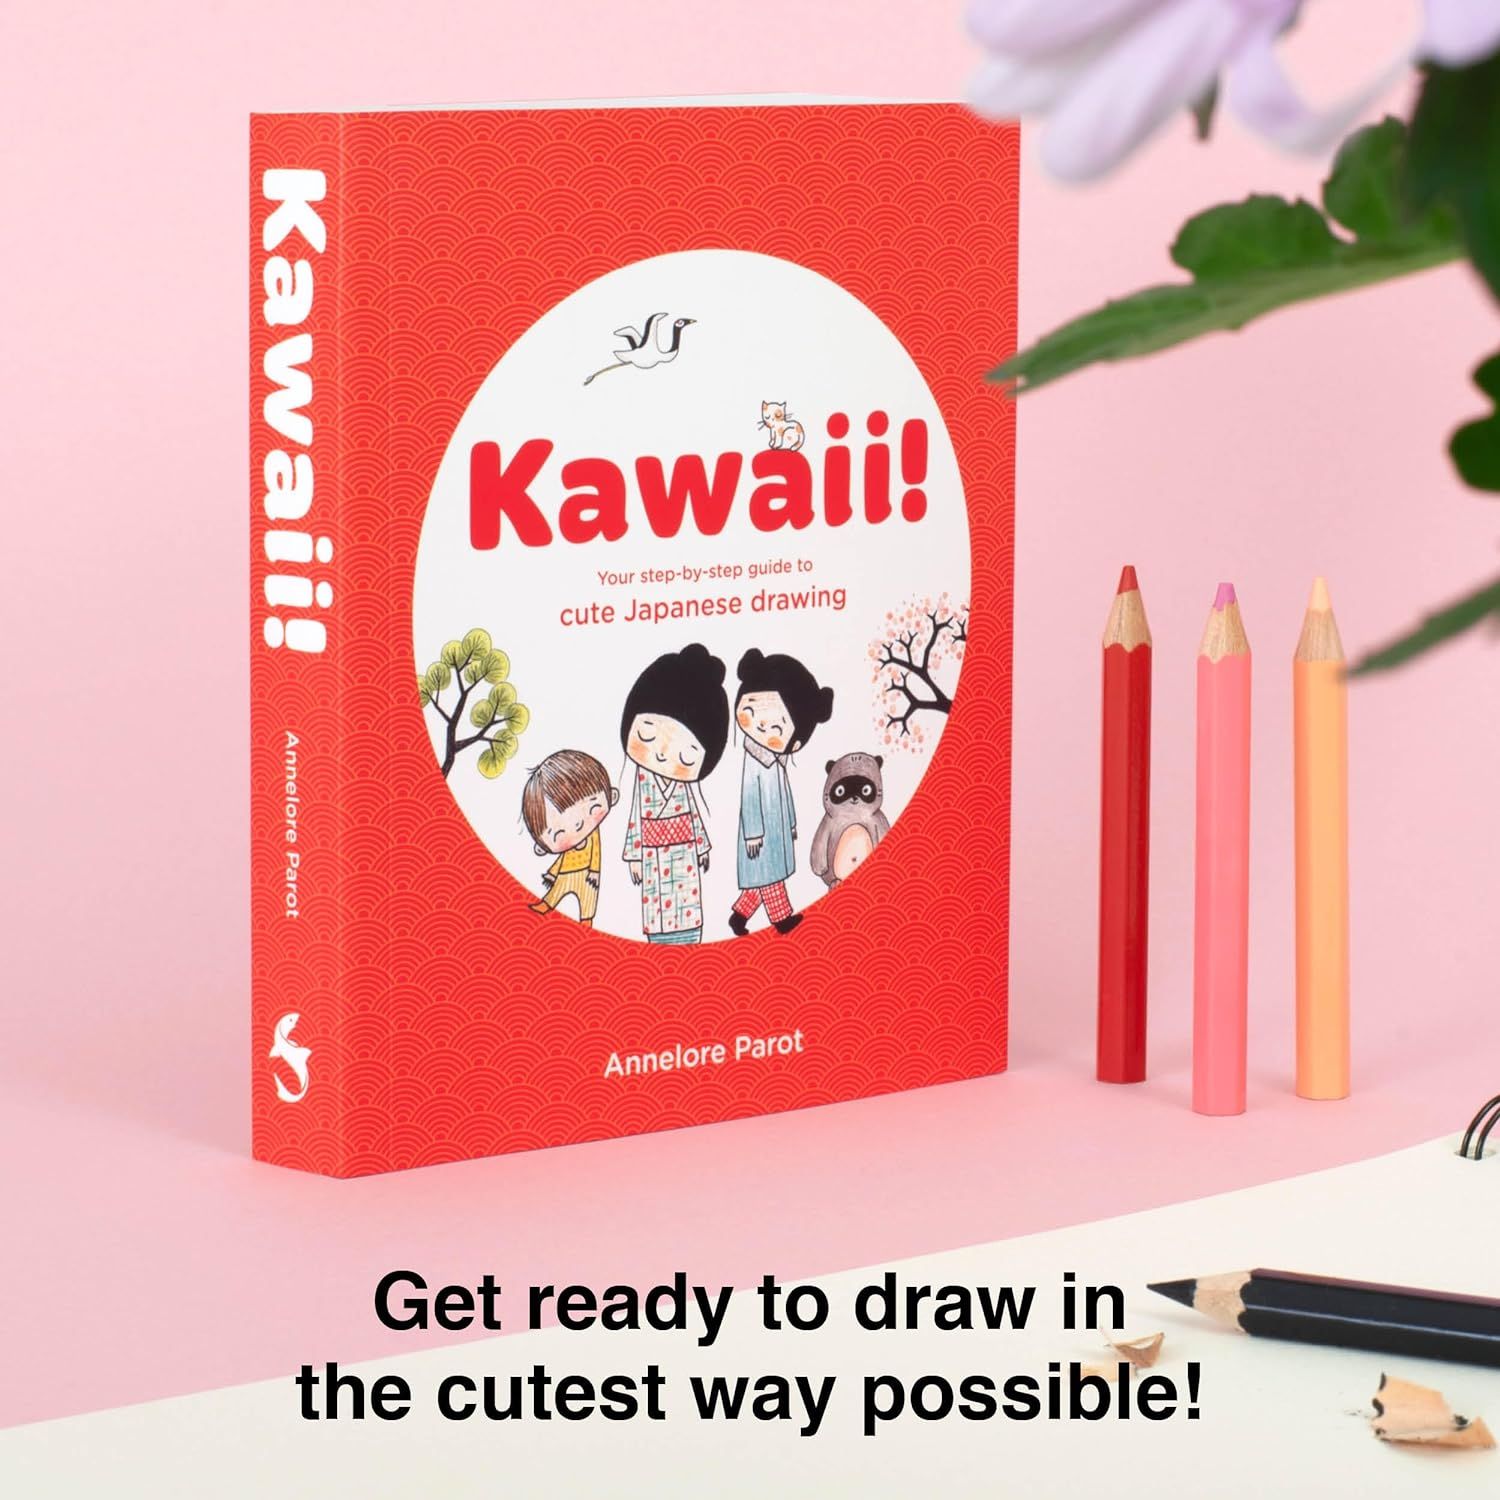  KAWAII! Your step-by-step guide to cute Japanese drawing 